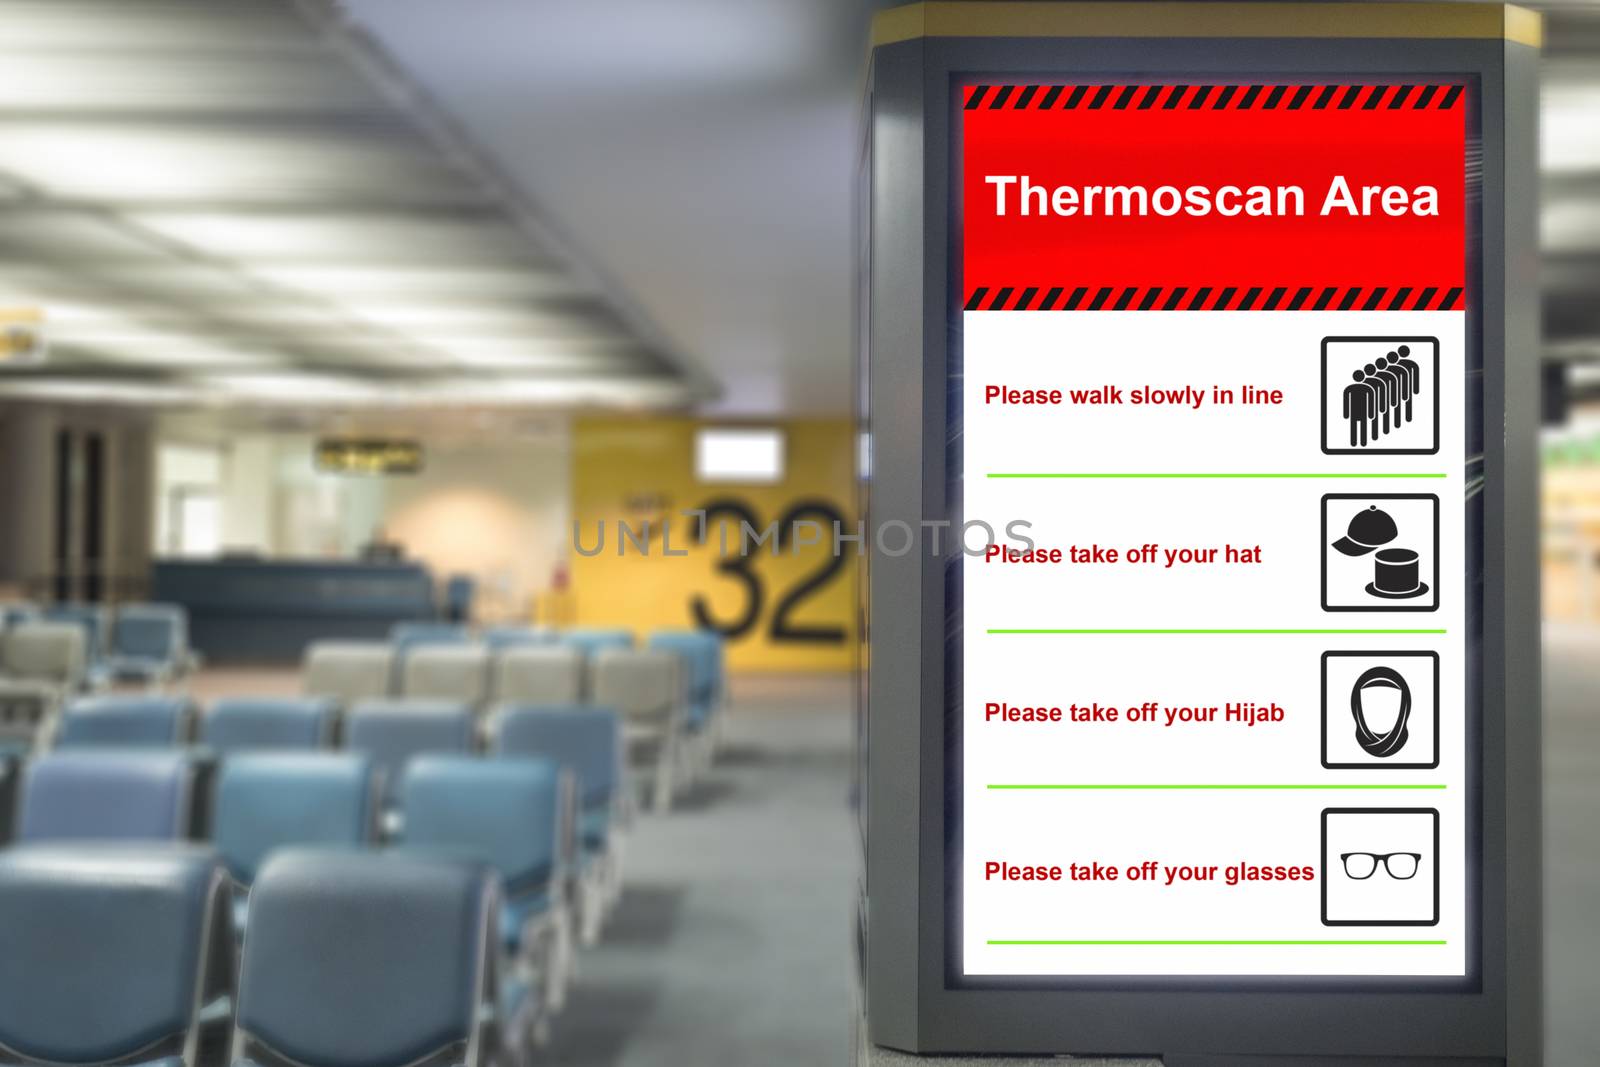 Health Control: Thermoscan Area sign at the airport for outbreak control situation at passengers arriving terminal by Public Health Officials